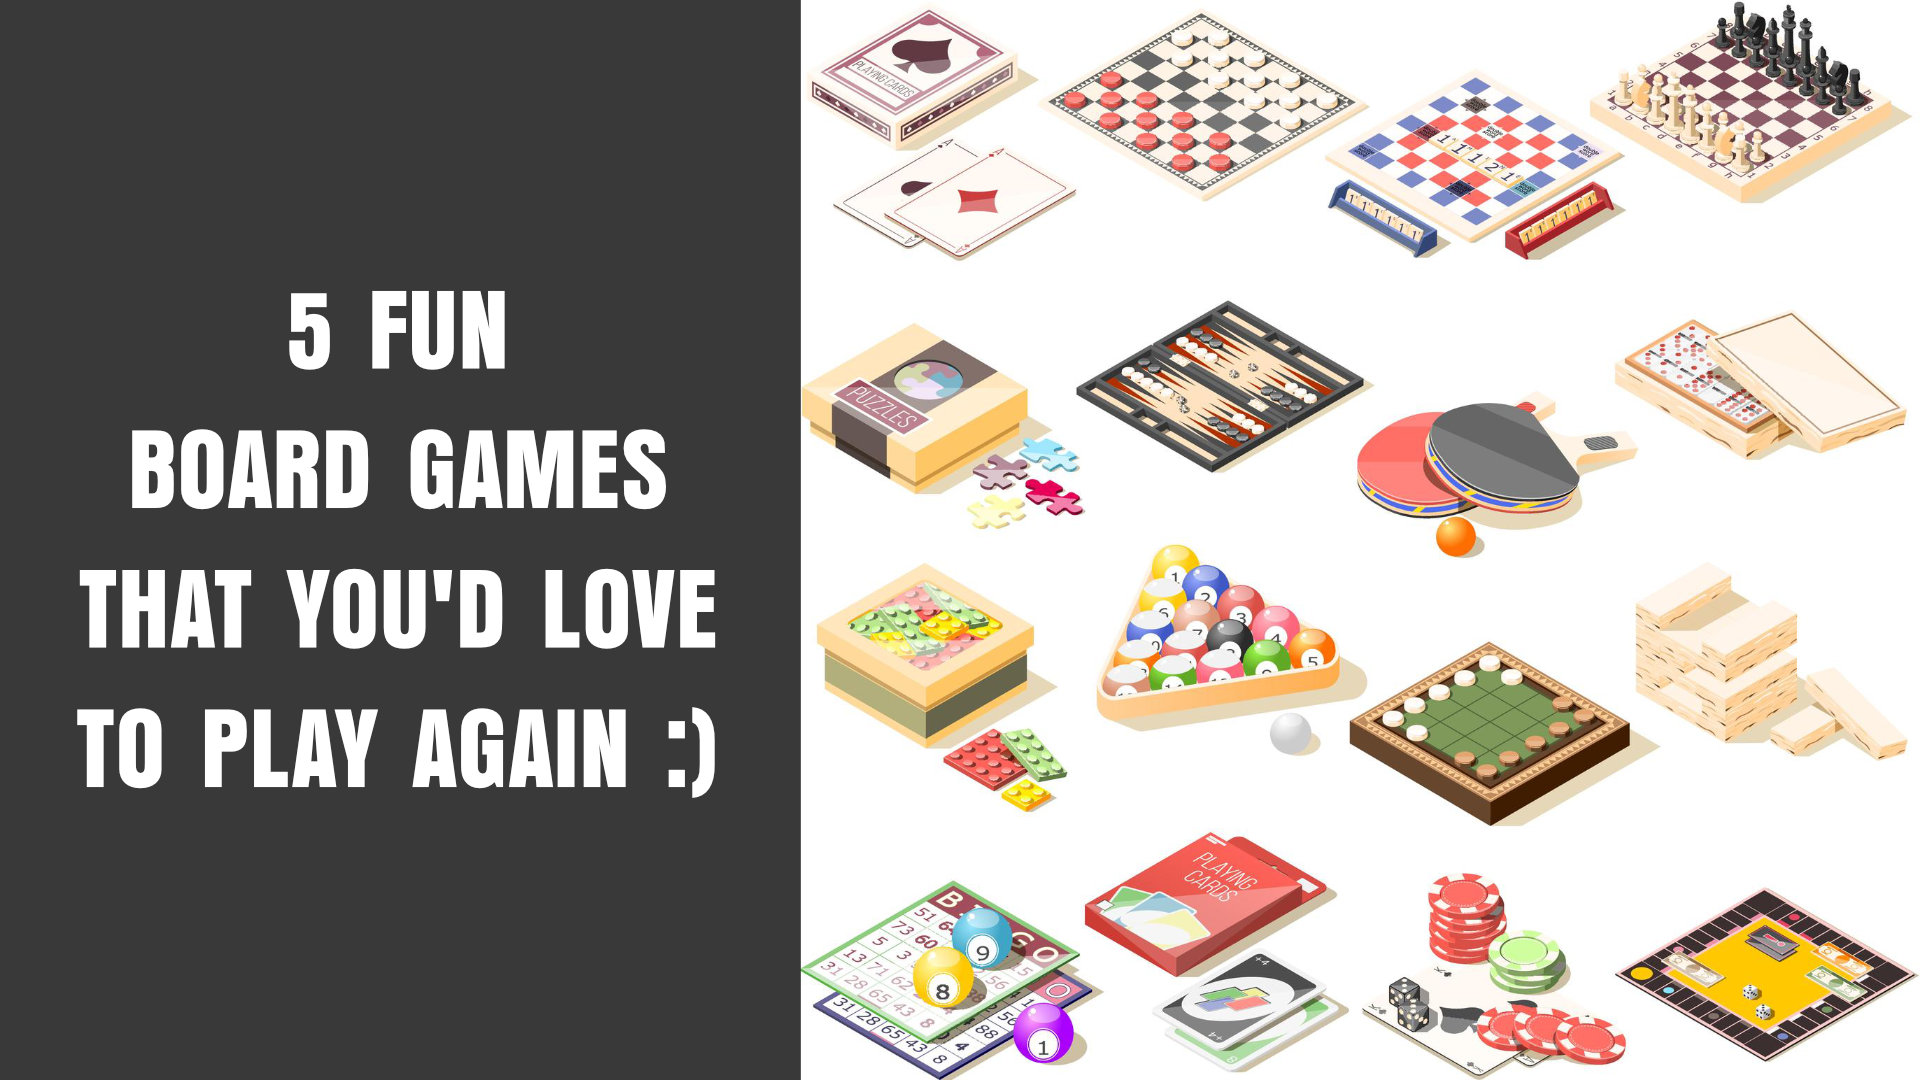 5 Fun Board Games you can Play Online for Free - Snakes & Ladders, Chess, Dominoes, Goose & Connect 4